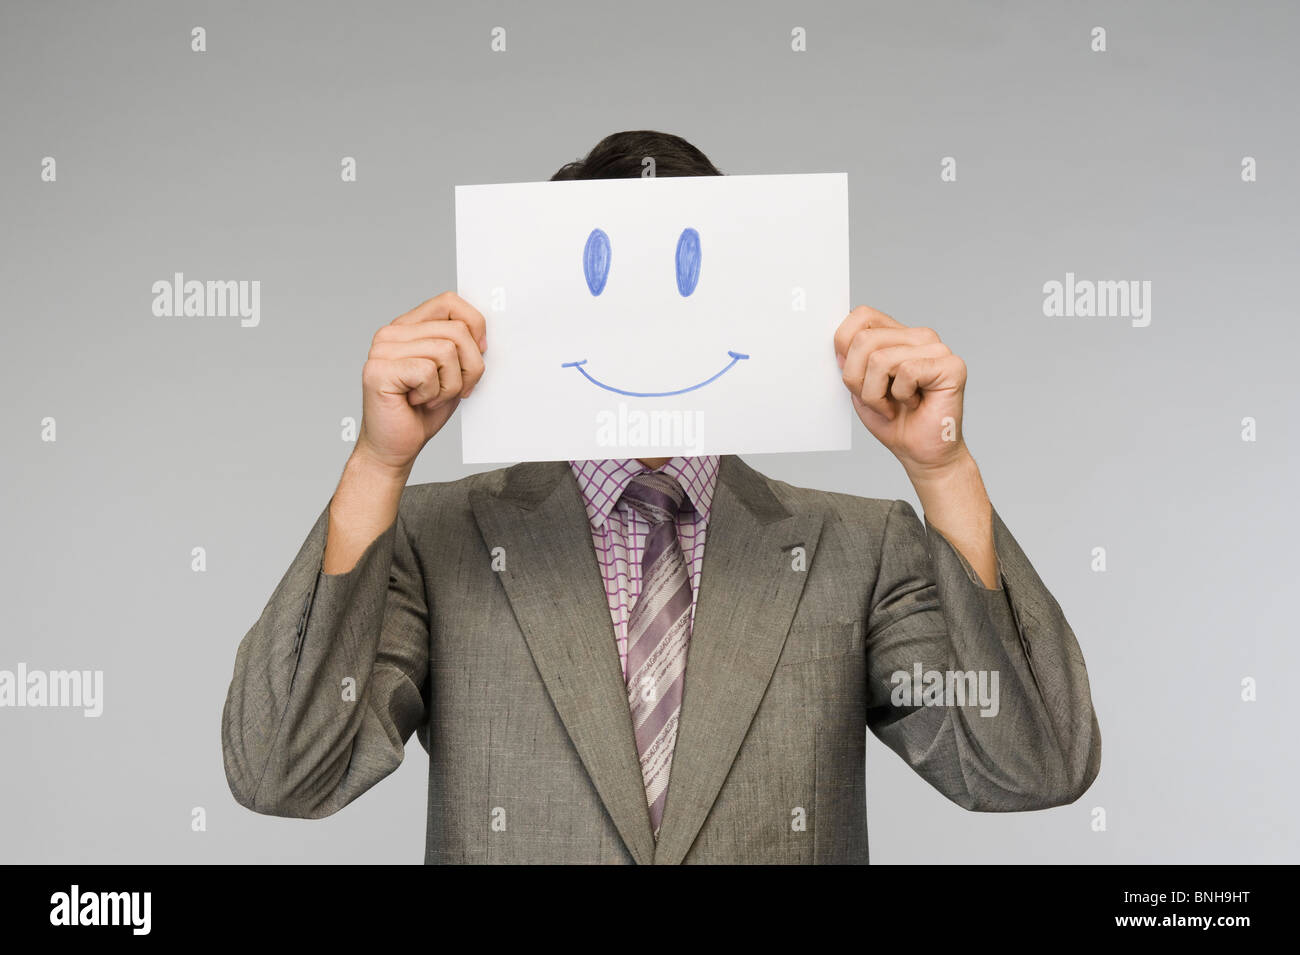 Businessman holding a smiley face paper in front of his face Stock Photo